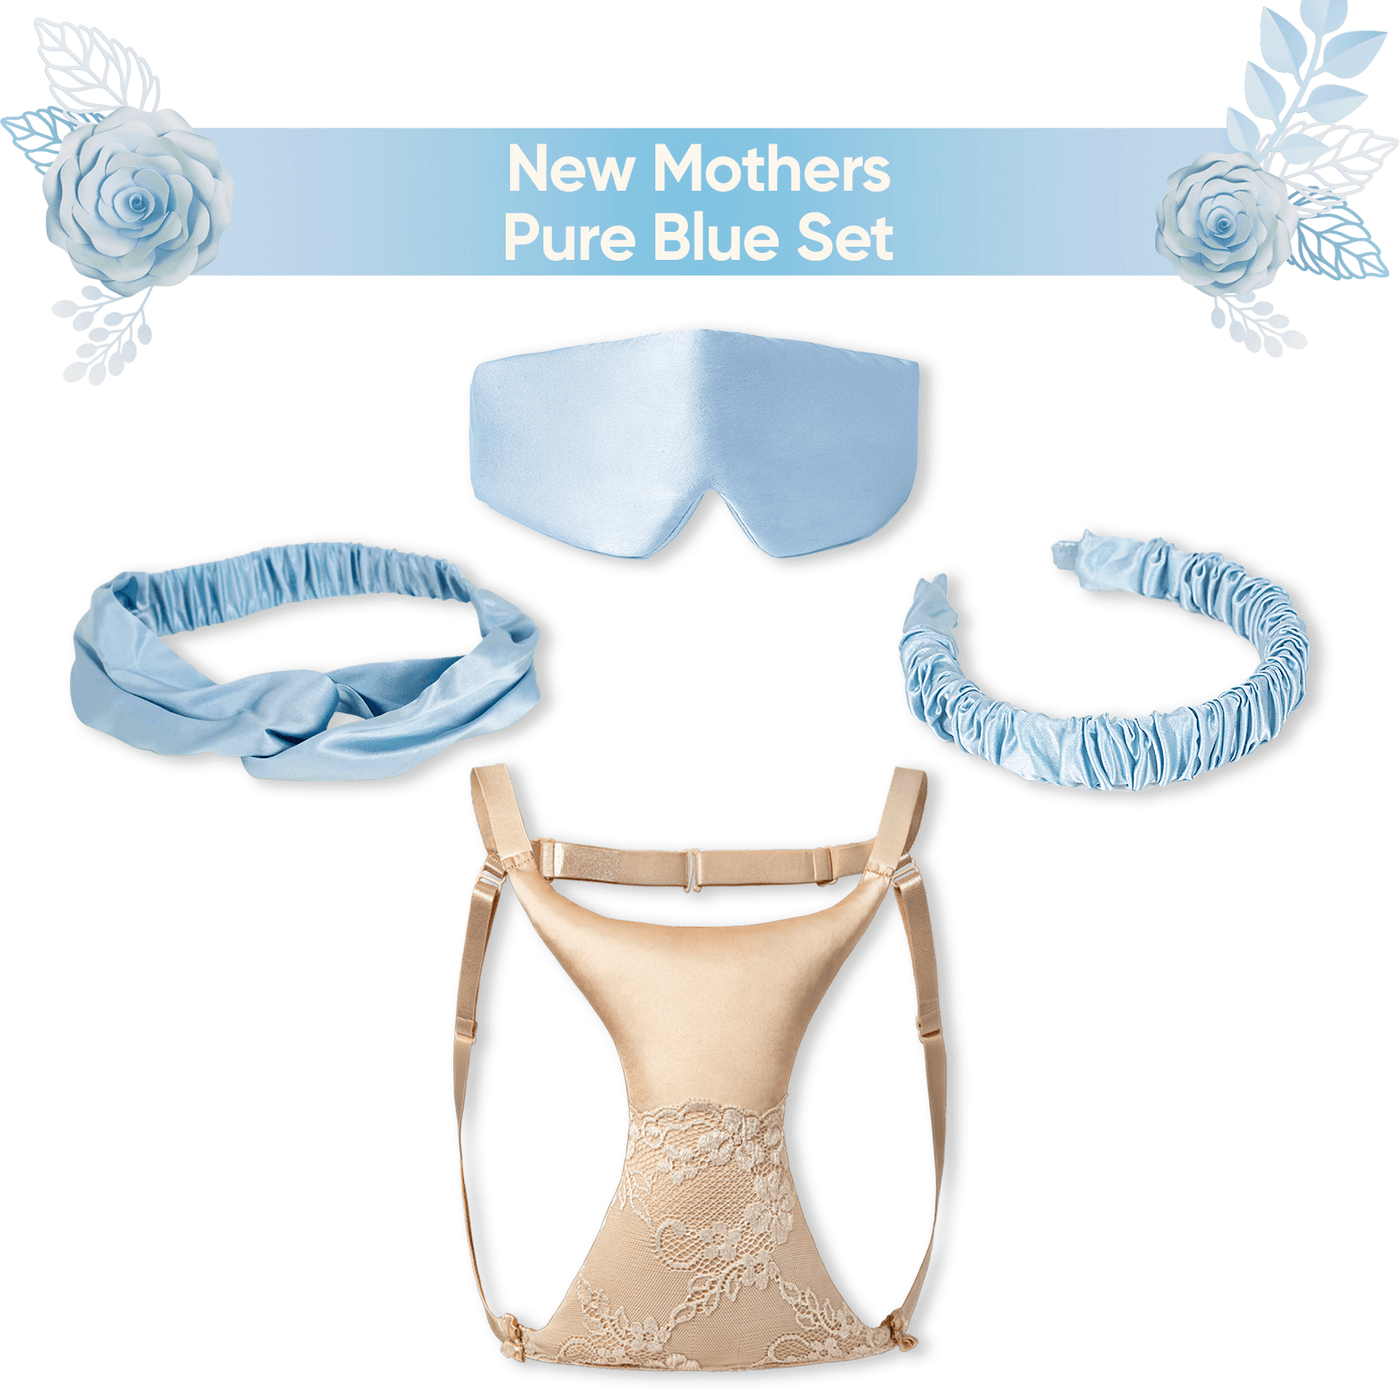 New Mothers Pure Blue Set